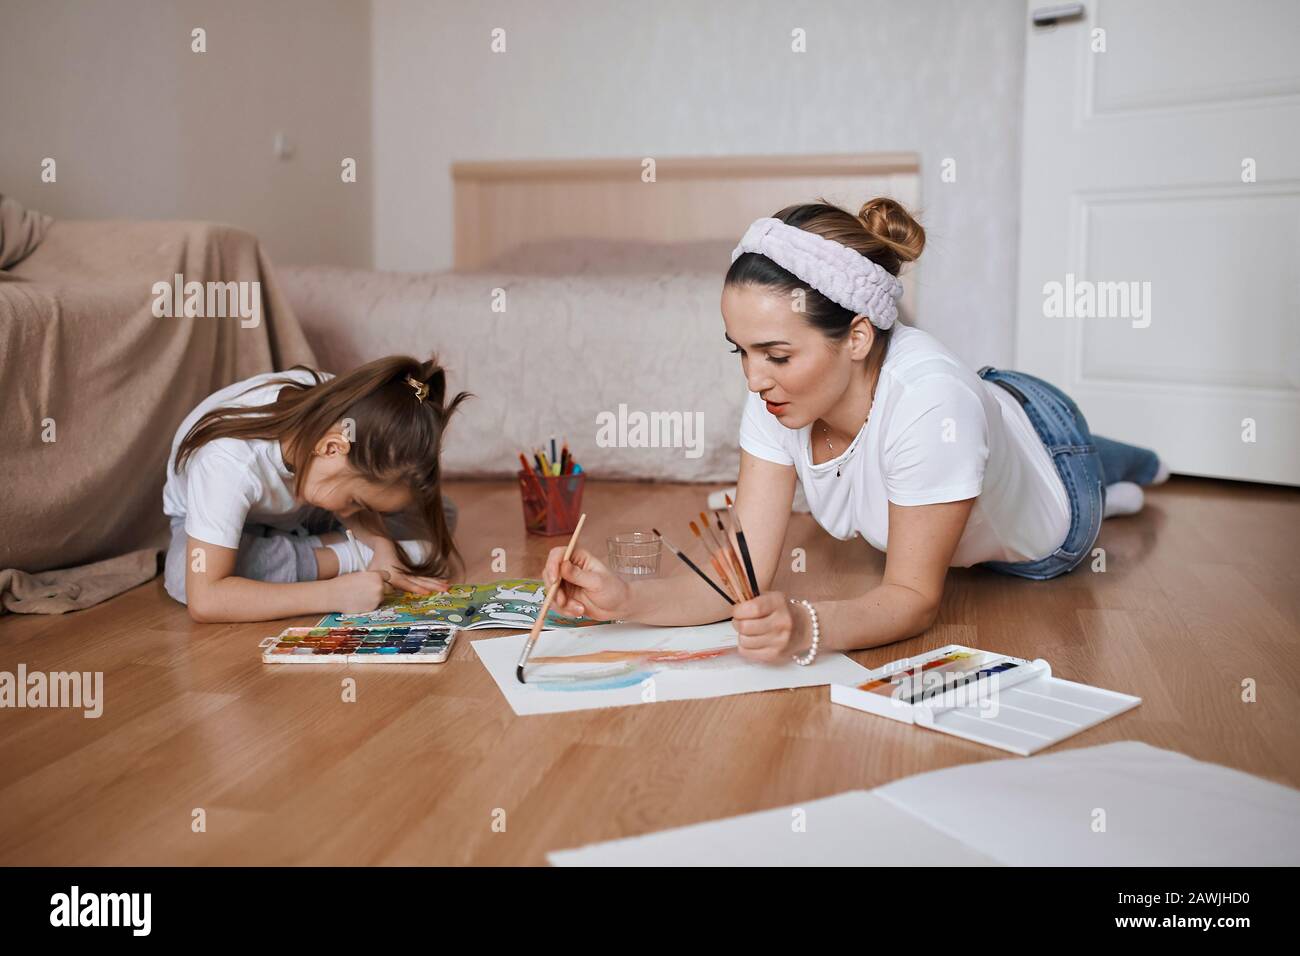 young woman and her daughter enjoying drawing, painting process, close up photo, happiness, useful time, woman and girl attending painting lesson Stock Photo